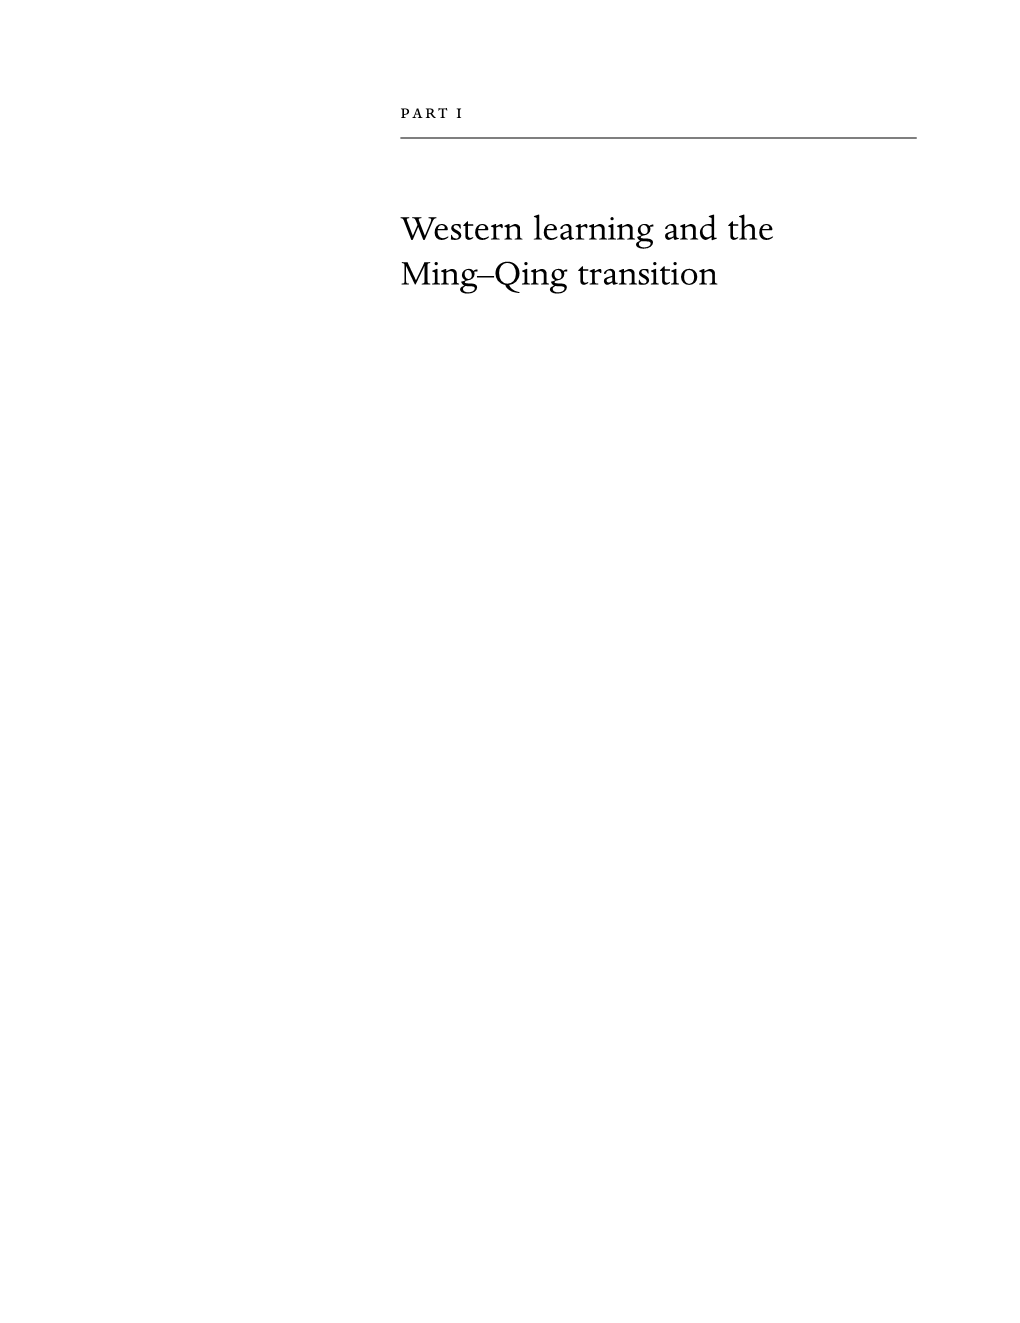 Western Learning and the Ming–Qing Transition OUP CORRECTED PROOF – FINAL, 10/11/2011, Spi OUP CORRECTED PROOF – FINAL, 10/11/2011, Spi